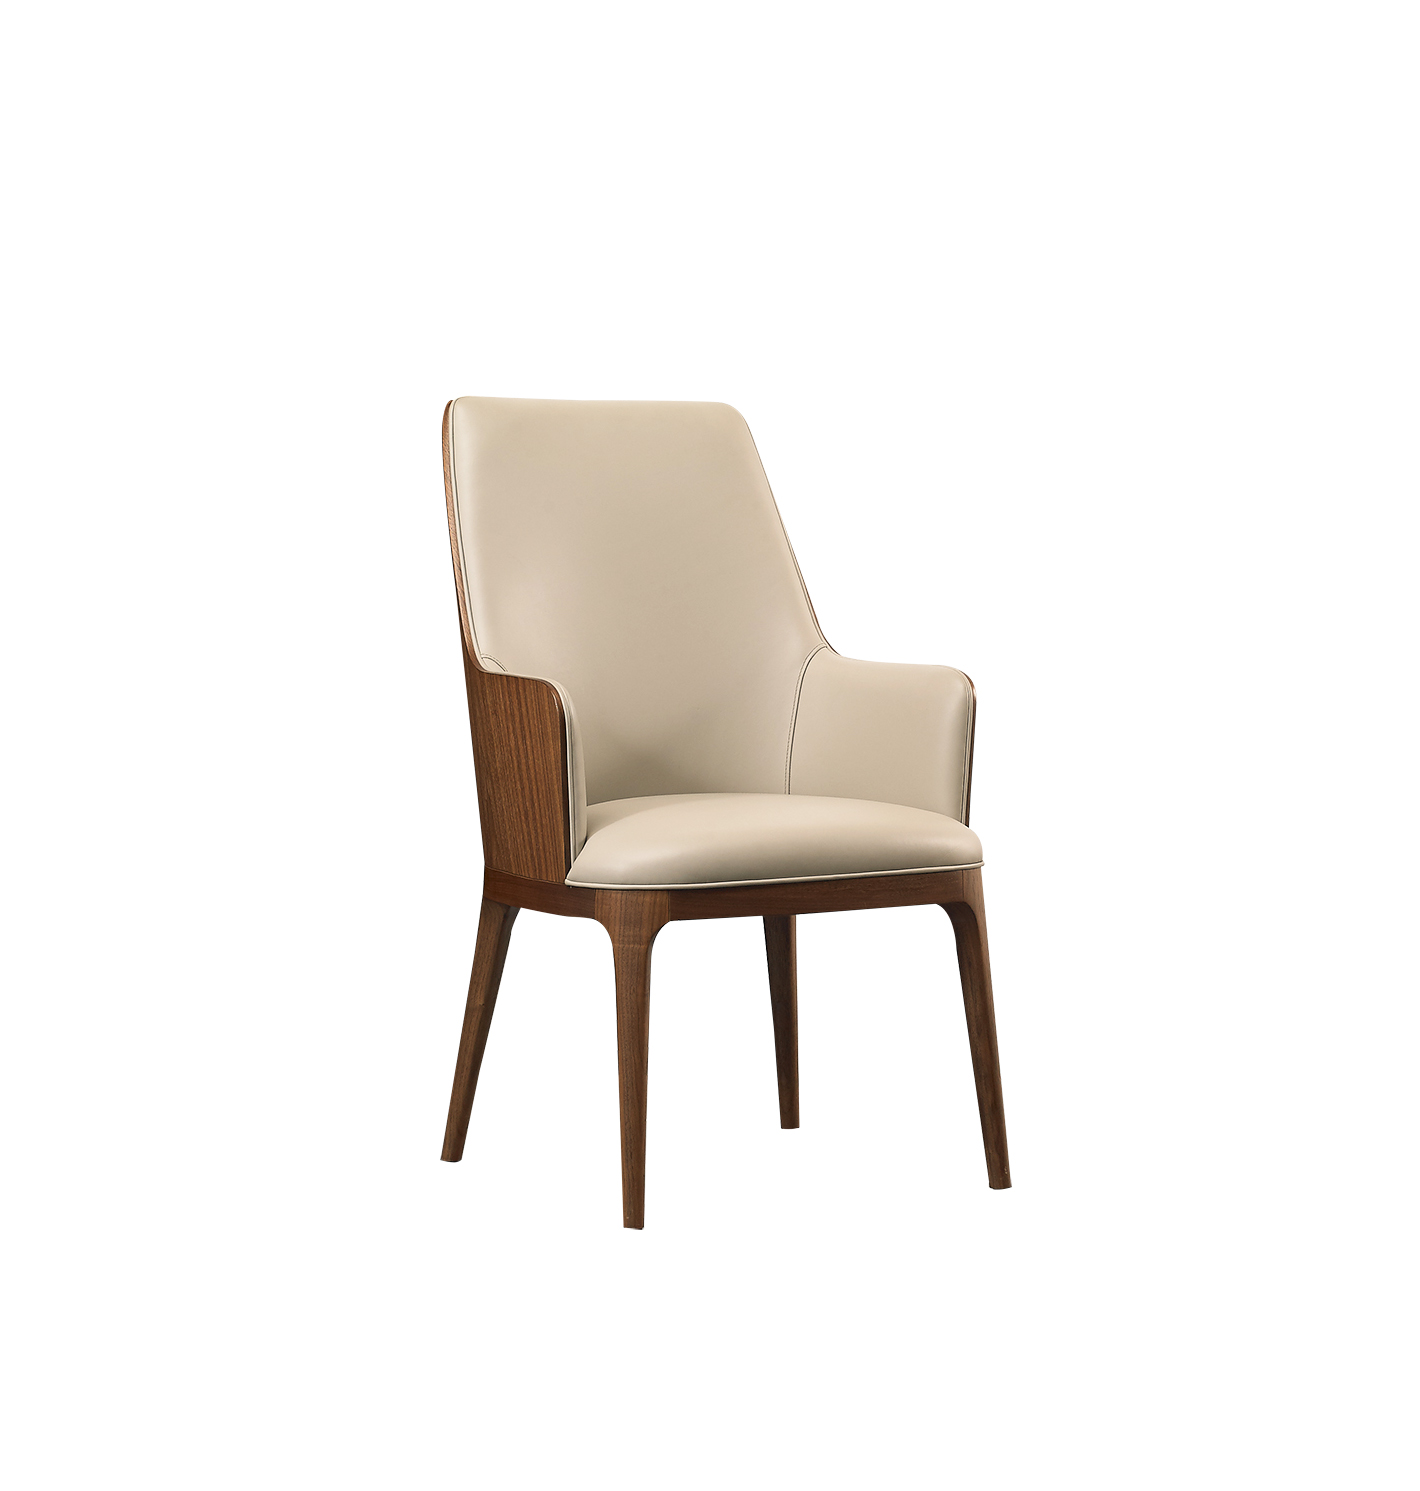 Factory Modern Luxury Design Furniture Dining Room Chairs Dining Chairs